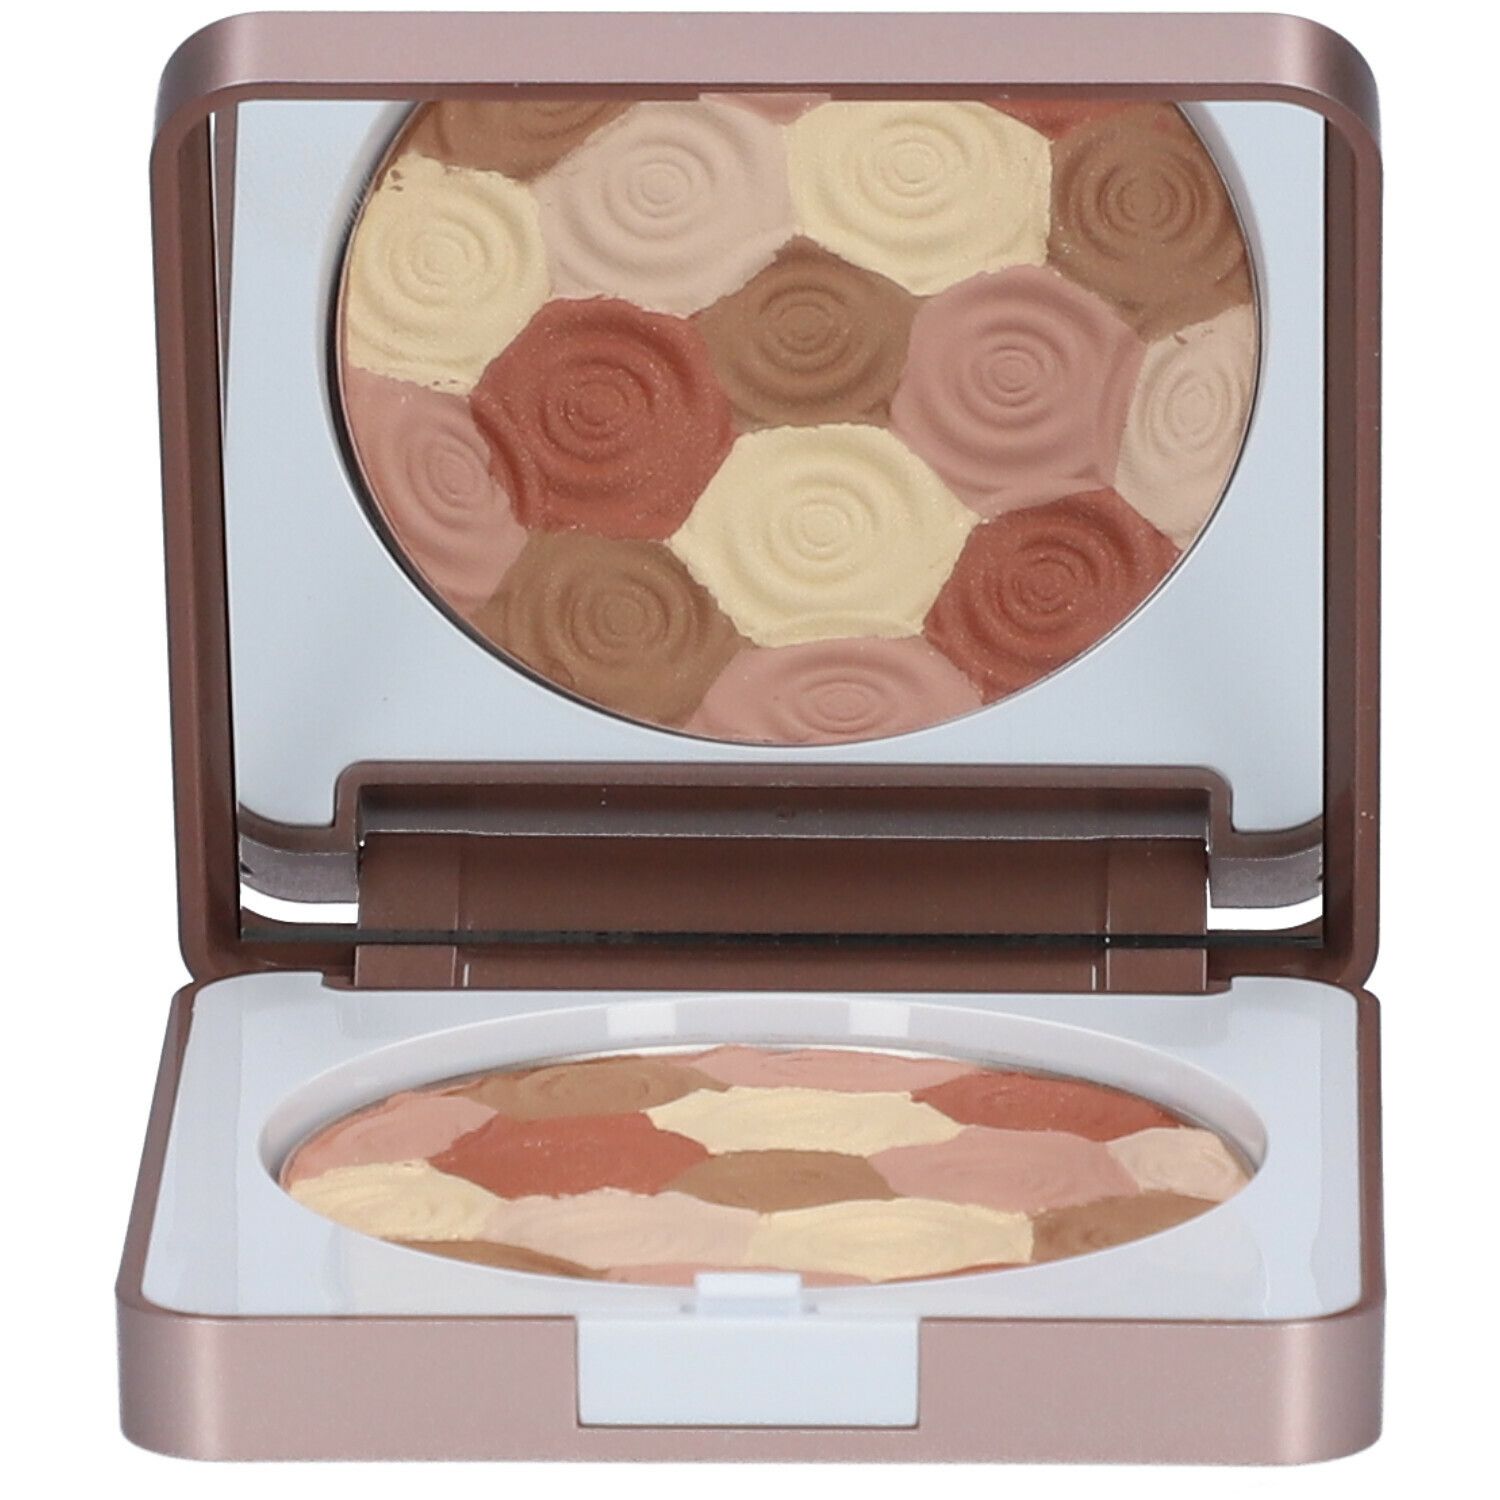 Image of BioNike DEFENCE COLOR SUN TOUCH Bronzer 206 Mosaik